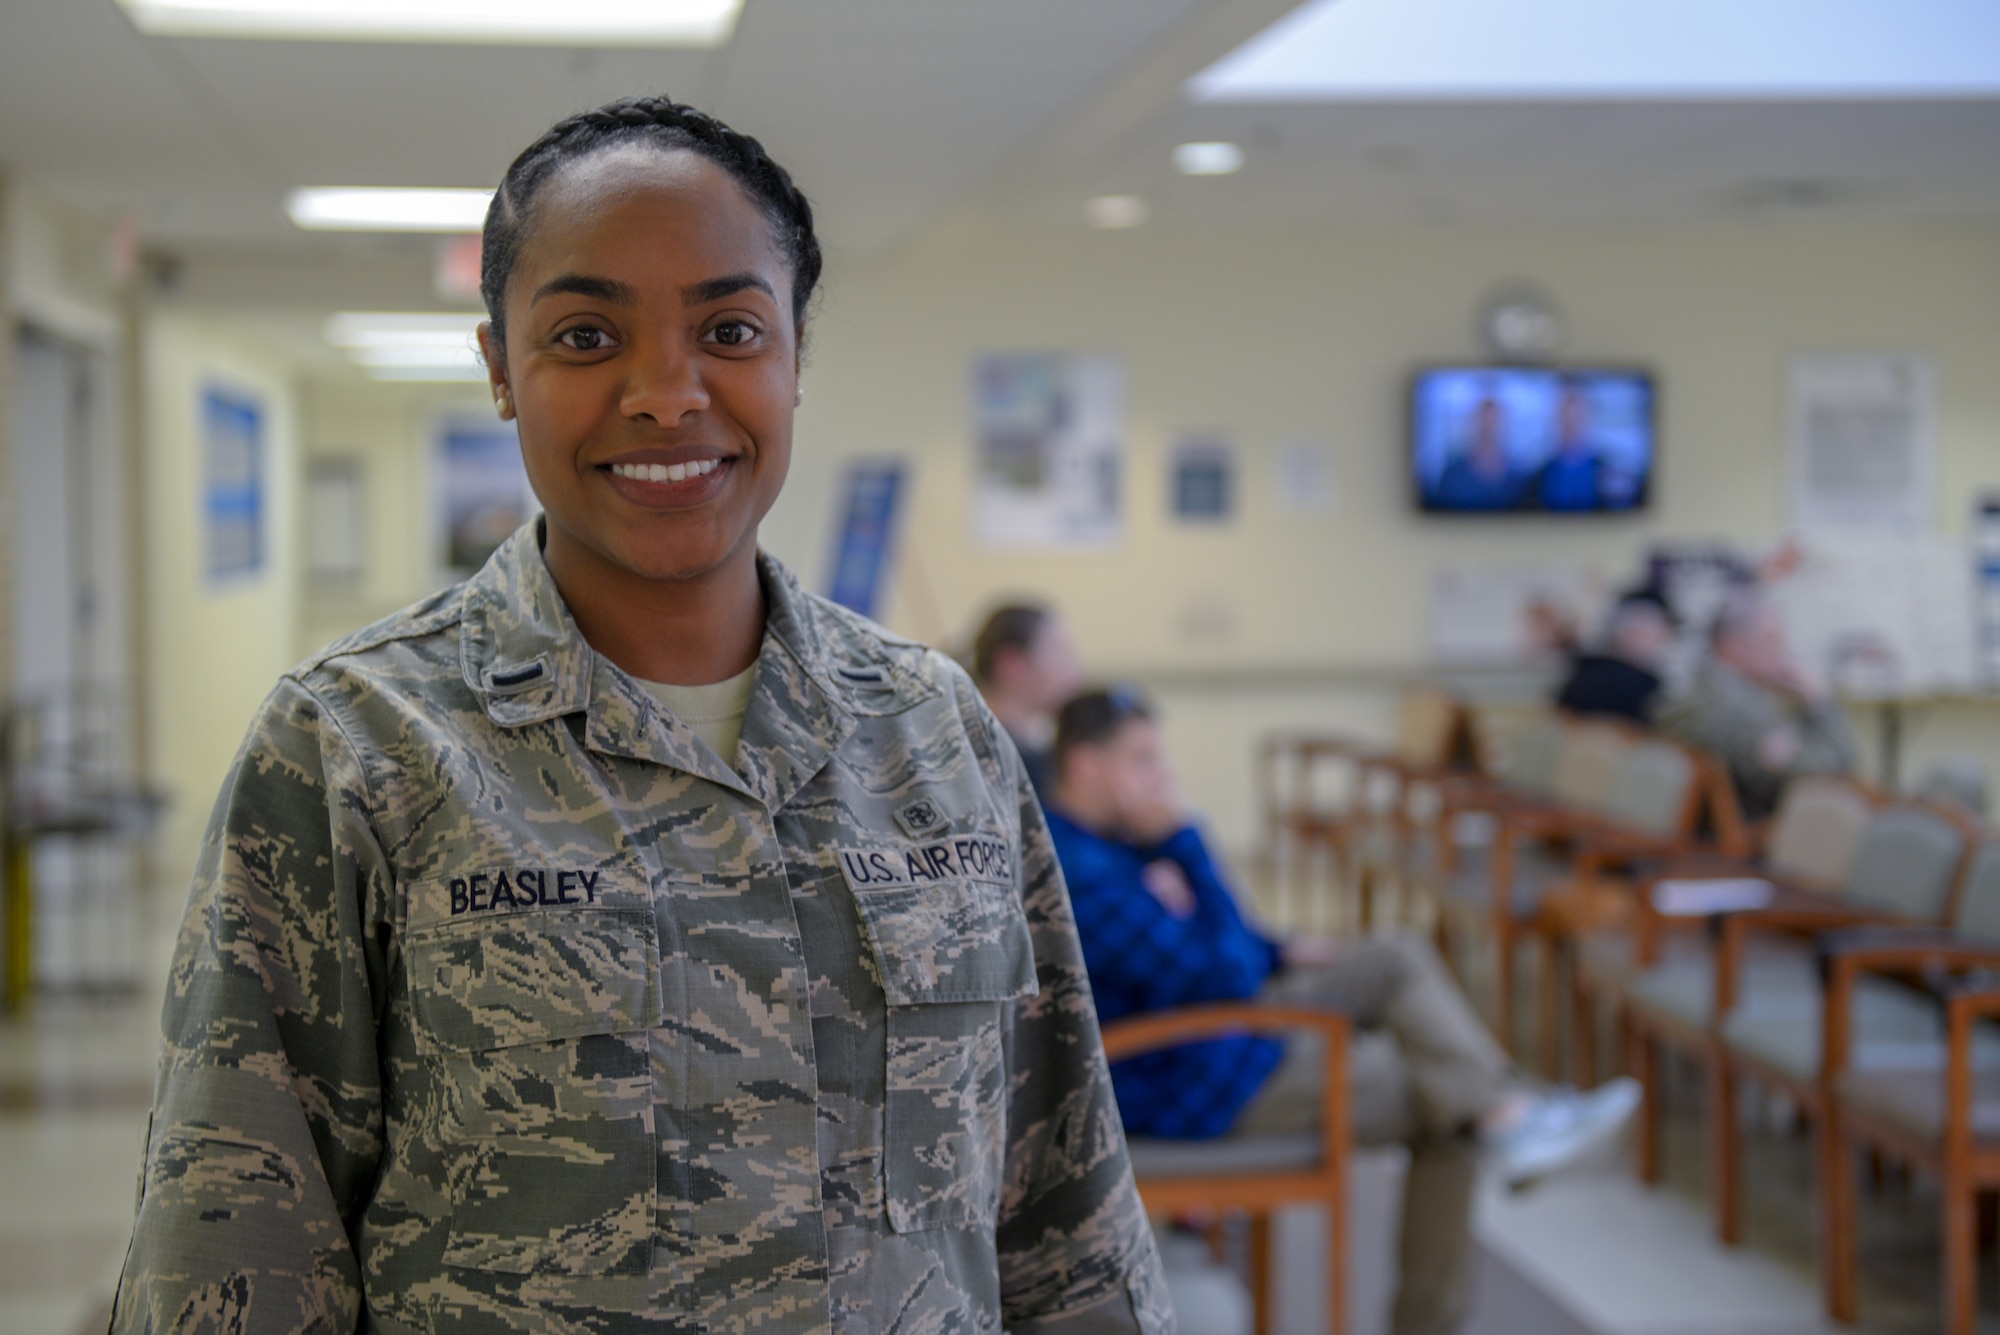 U.S. Air Force 1st Lt. Valyn Beasley, 55th Medical Group practice manager healthcare administer, poses for a photo Dec. 19, 2018, at the Ehrling Bergquist Clinic, Bellevue, Nebraska. Beasley was recently admitted into the National Coalition of 100 Black Women of Omaha, a non-profit advocacy organization designed to increase the economic growth, health & wellness, educational, political and social gains for women of color, in recognition for her community service. (U.S. Air Force photo by Tech. Sgt. Rachelle Blake)